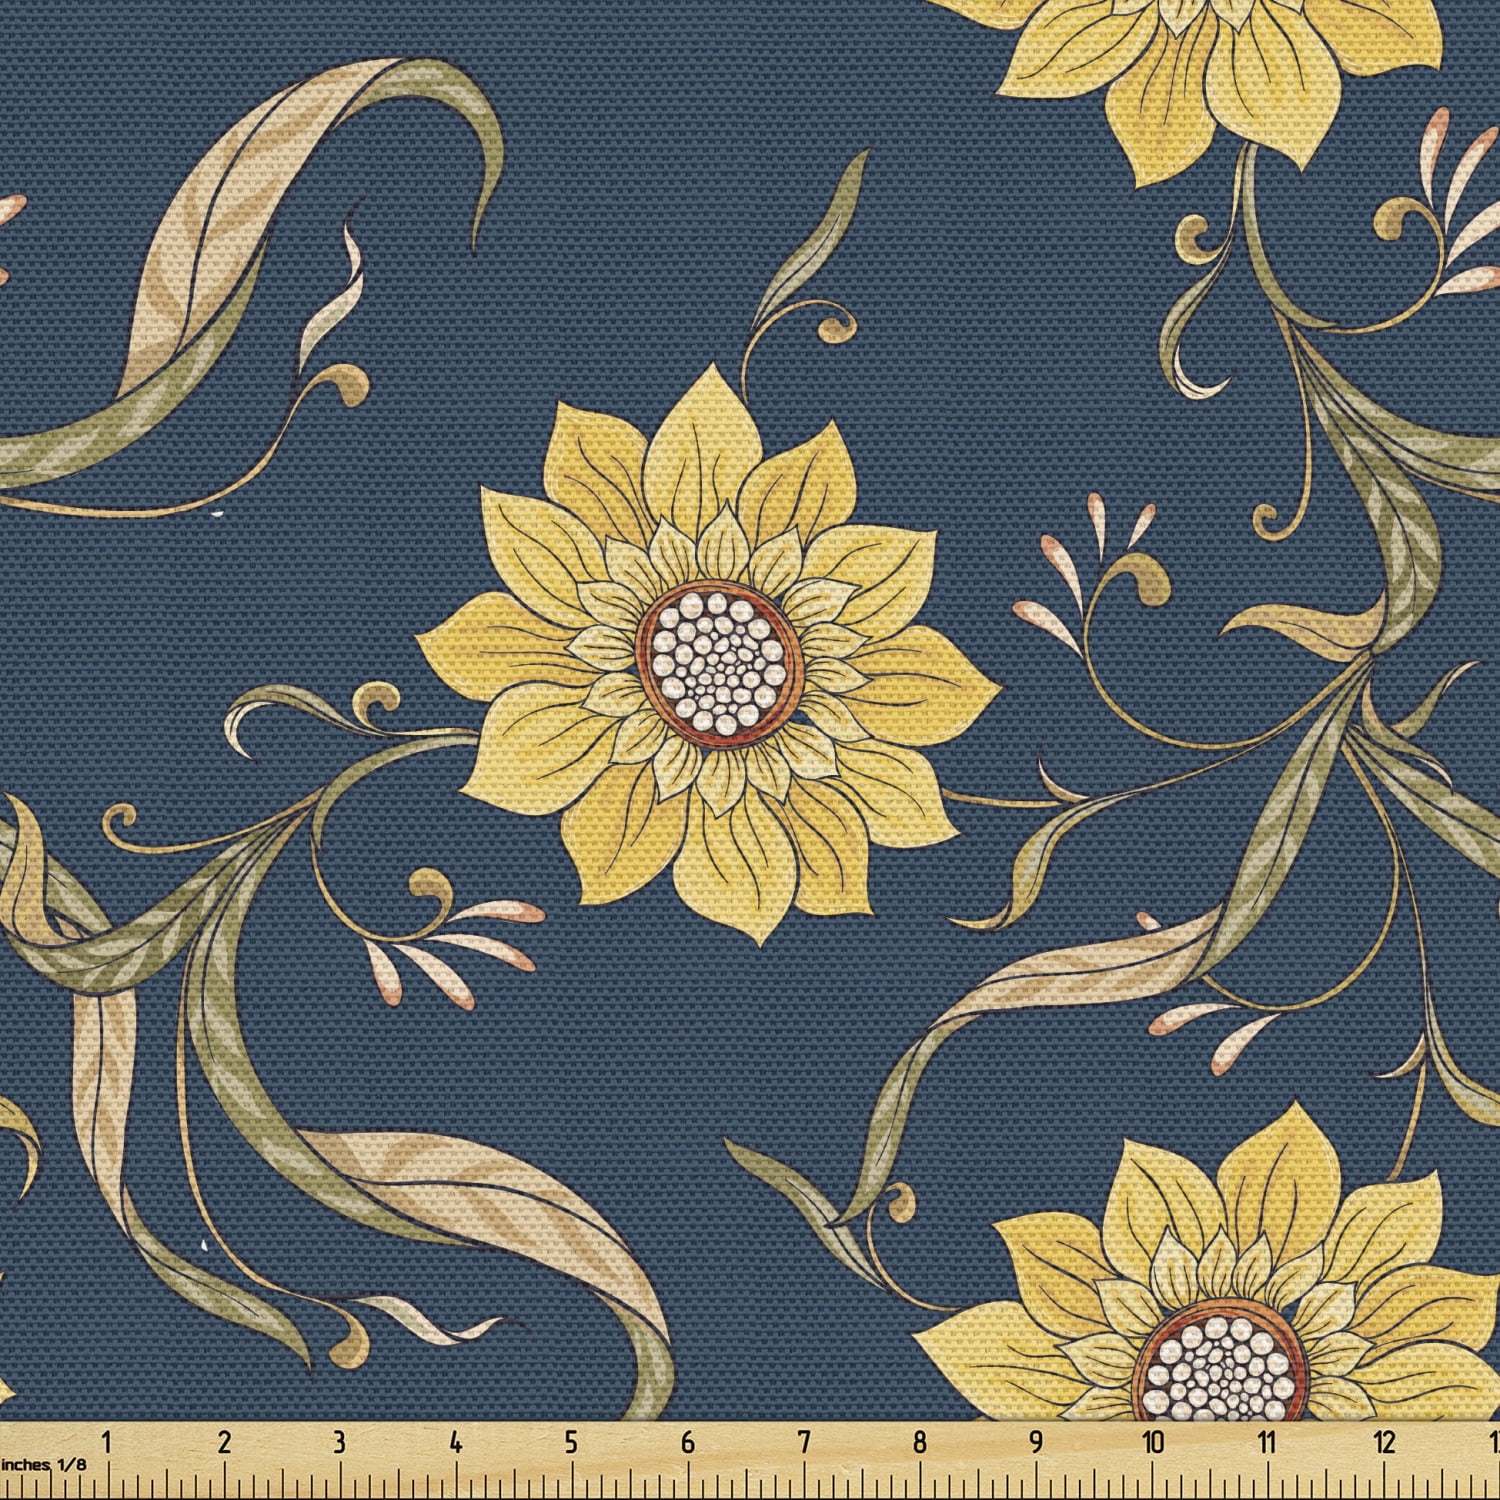 Printed fabric of your choice featuring Wild Yellow Sunflowers on Black Background Sunflower Fabric By the Yard